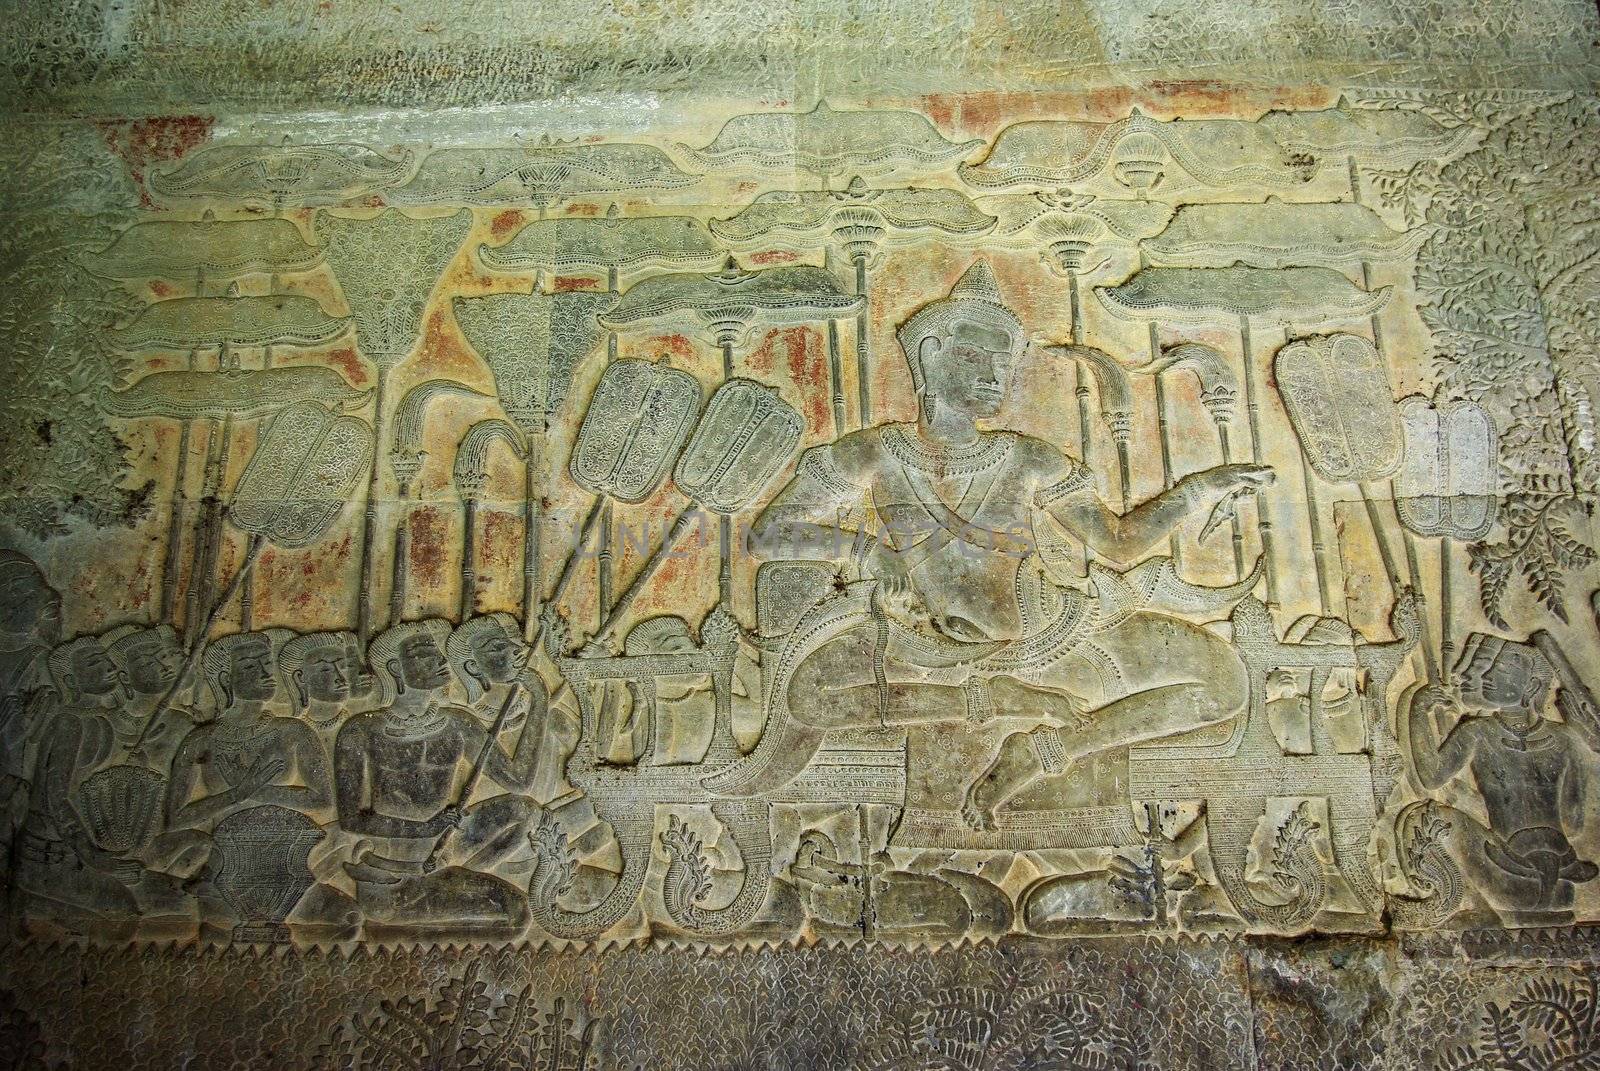 It's a close-up of engraved walls all around Angkor Wat temple